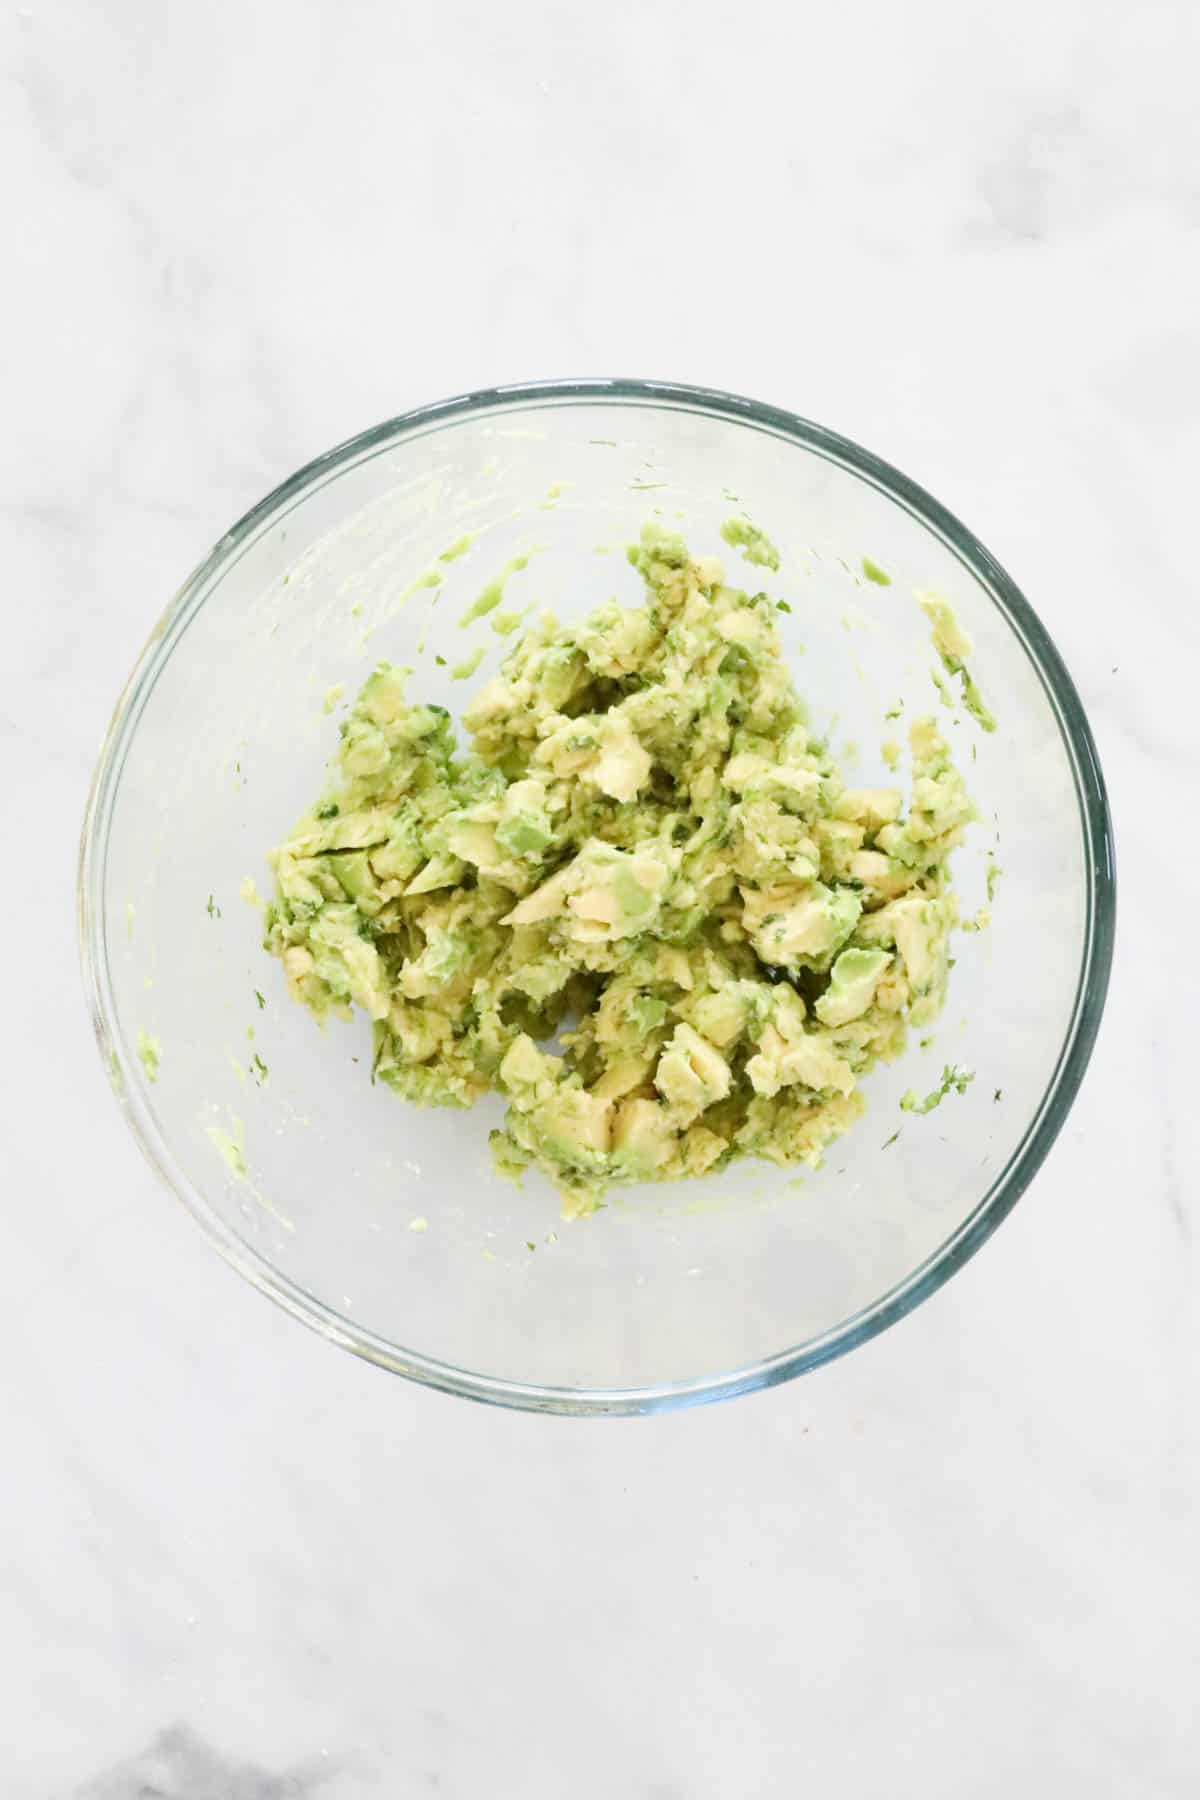 Chunks of avocado and herbs in a bowl.